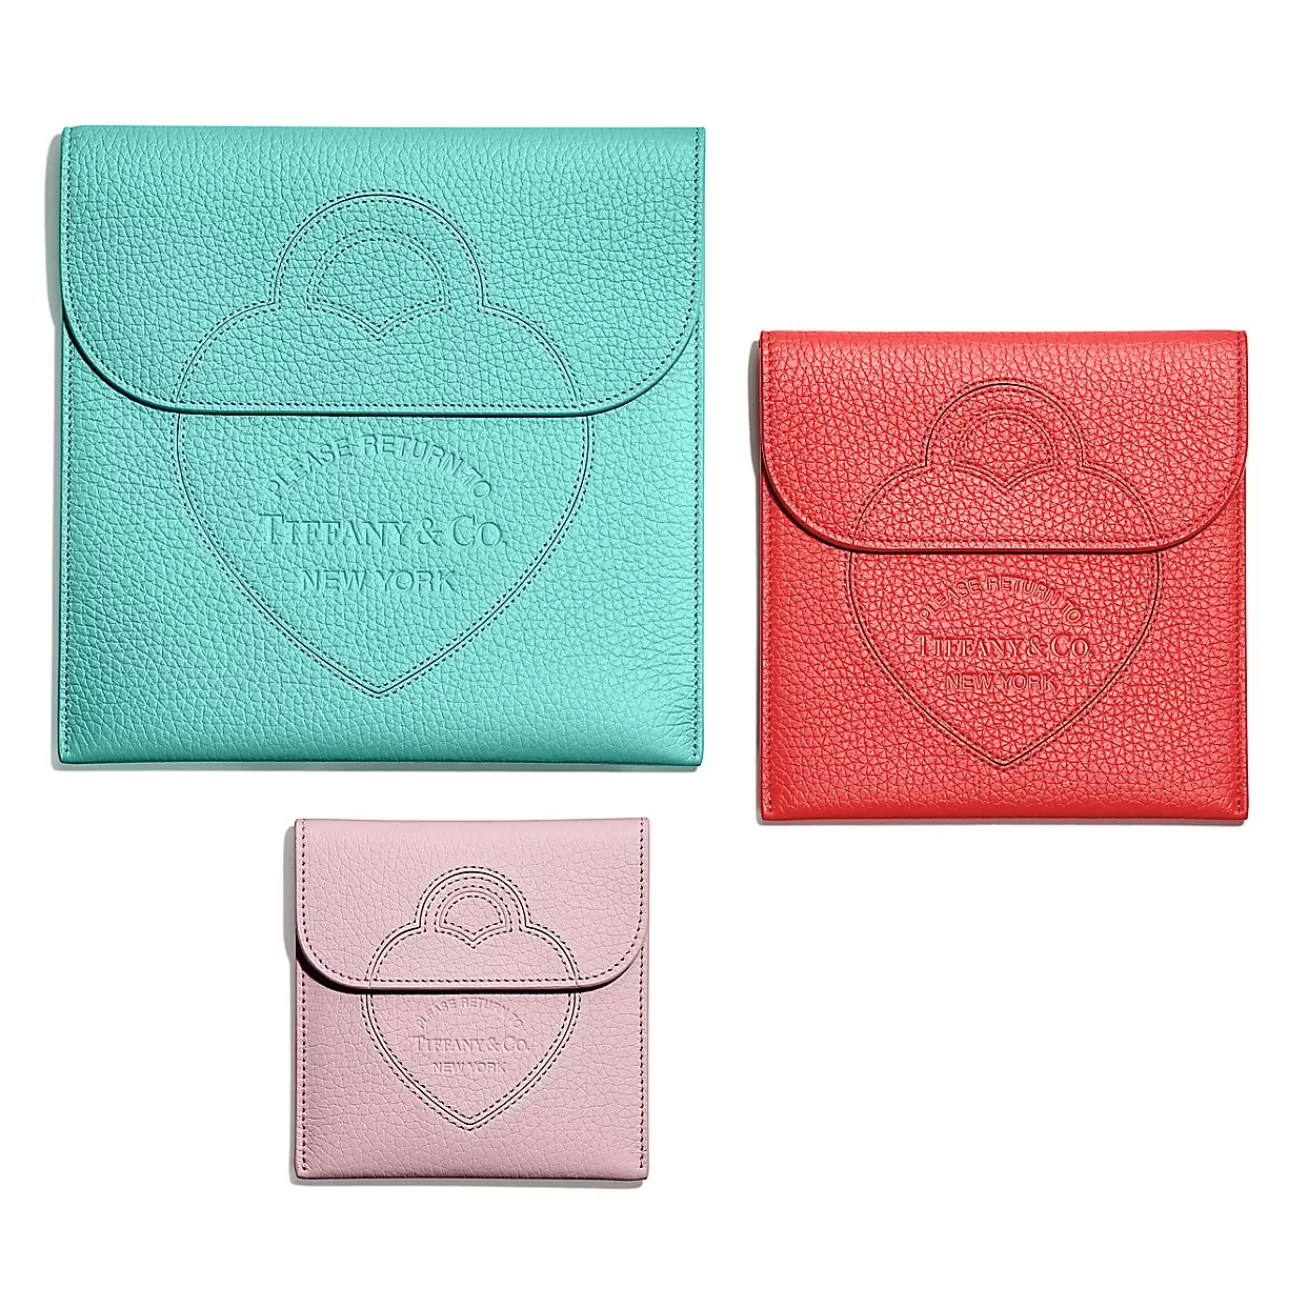 Tiffany & Co. Return to Tiffany® Pouch Set in Multi-colored Leather, Set of Three | ^Women Tiffany Blue® Gifts | Small Leather Goods